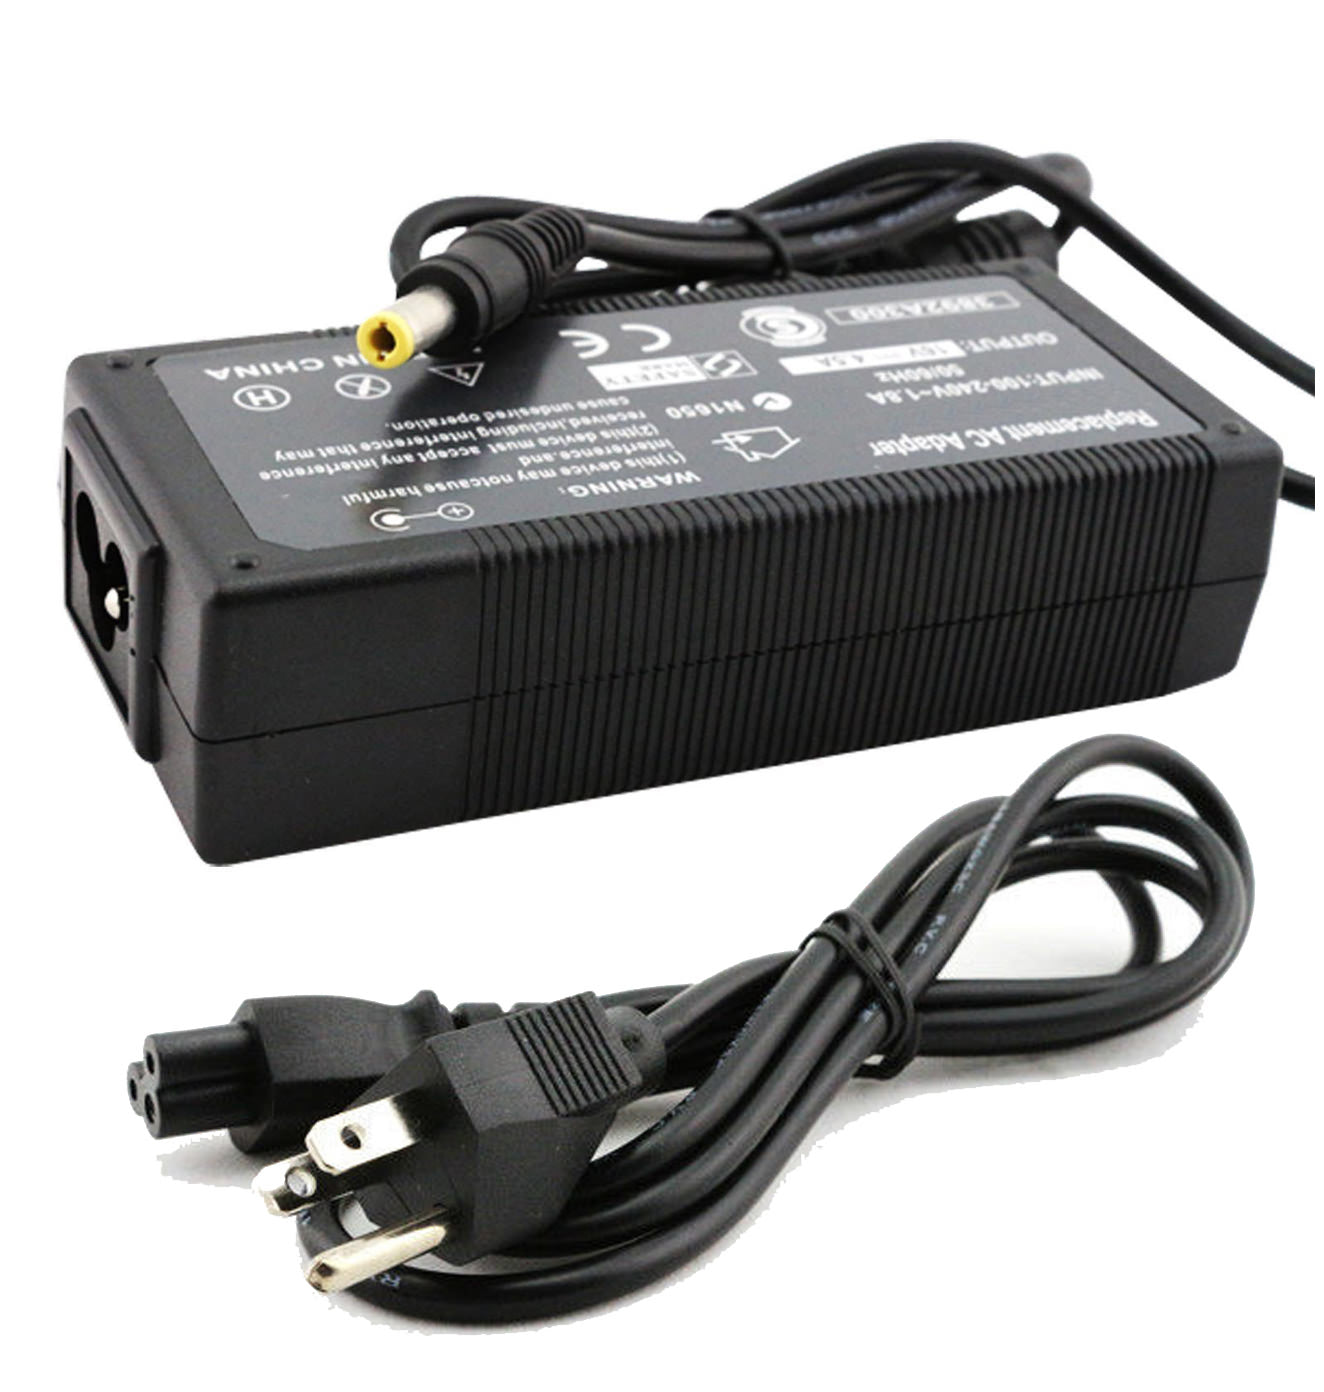 AC Adapter Charger for IBM ThinkPad 92P1014 Notebook.